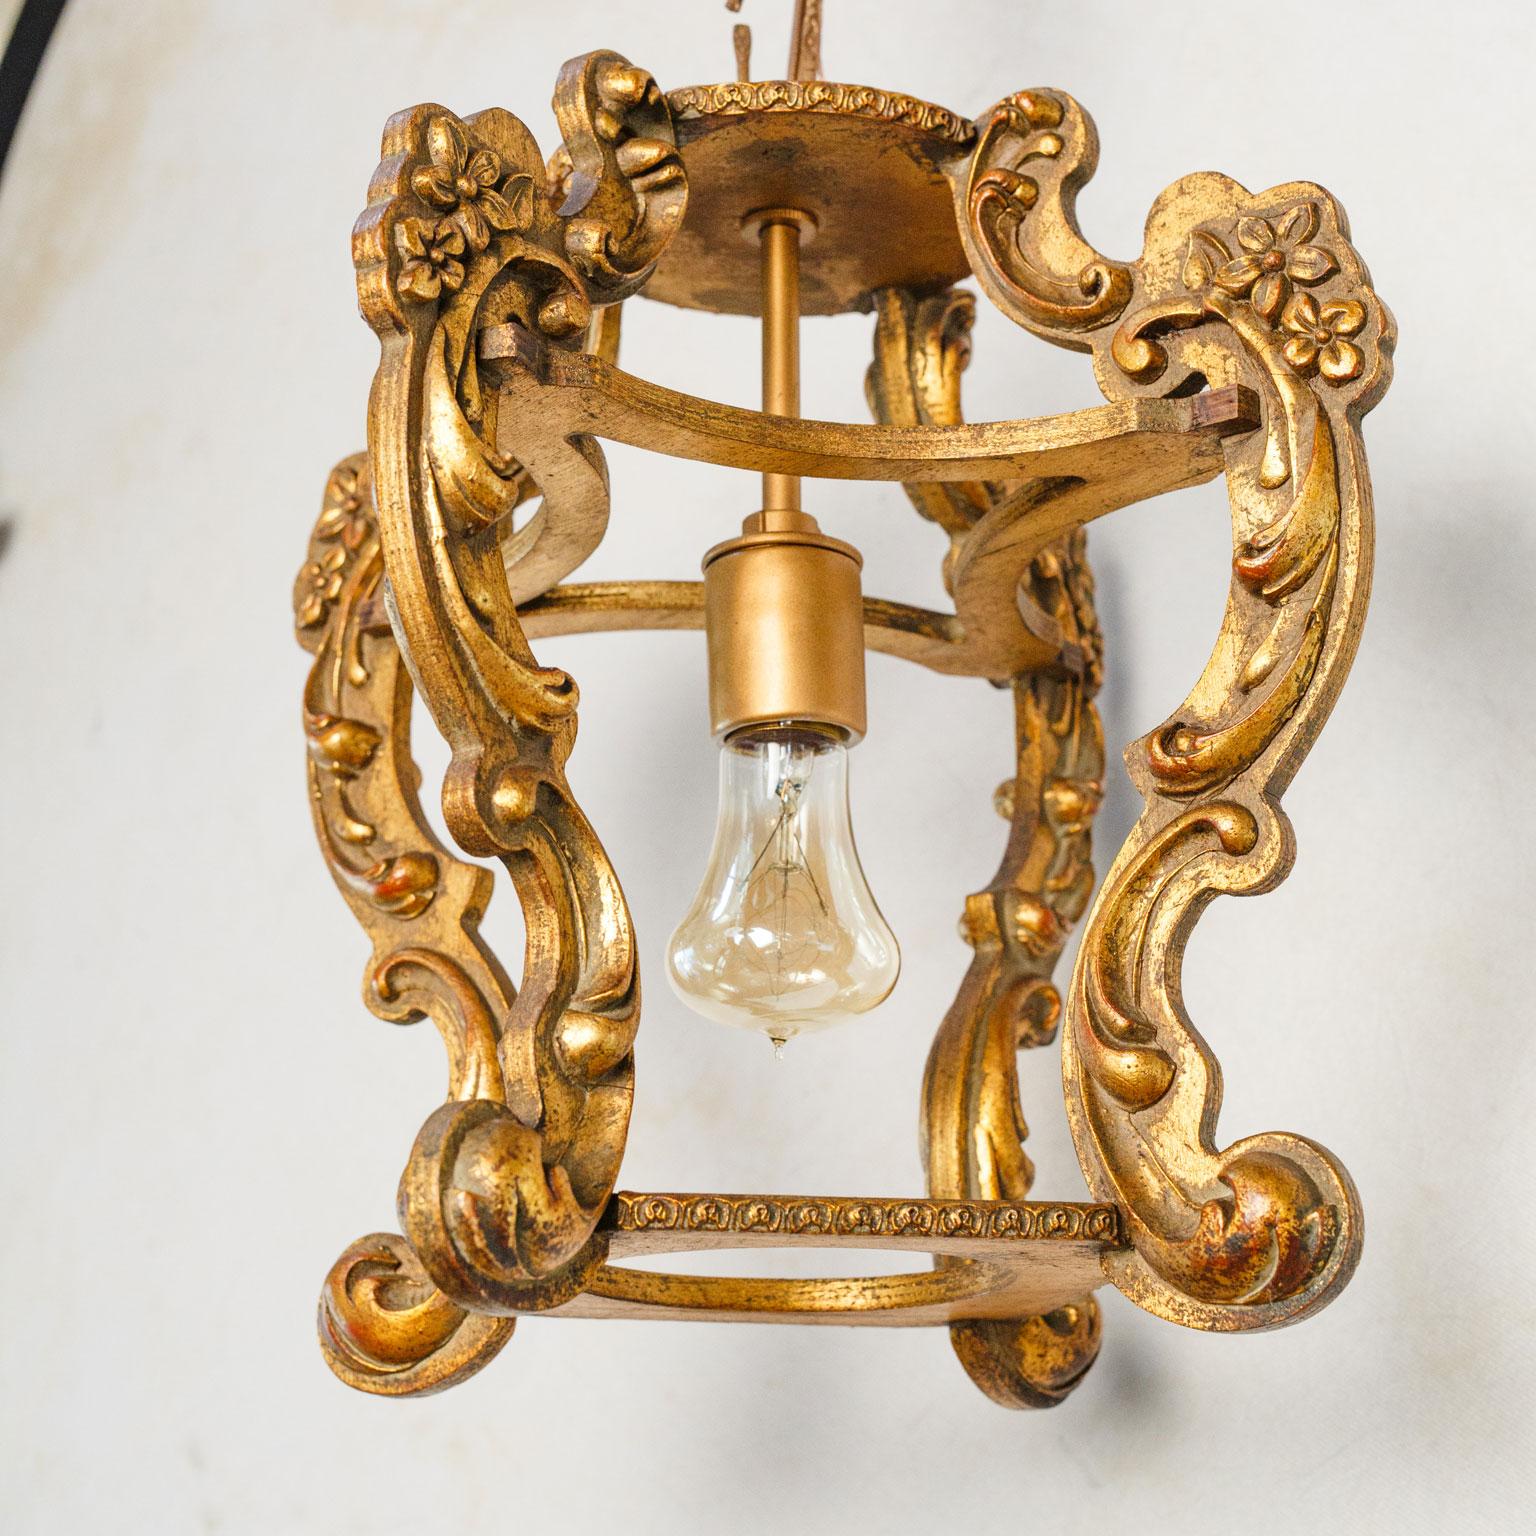 Hand-Carved Hand Carved Giltwood Italian Lantern with floral and scroll design. 